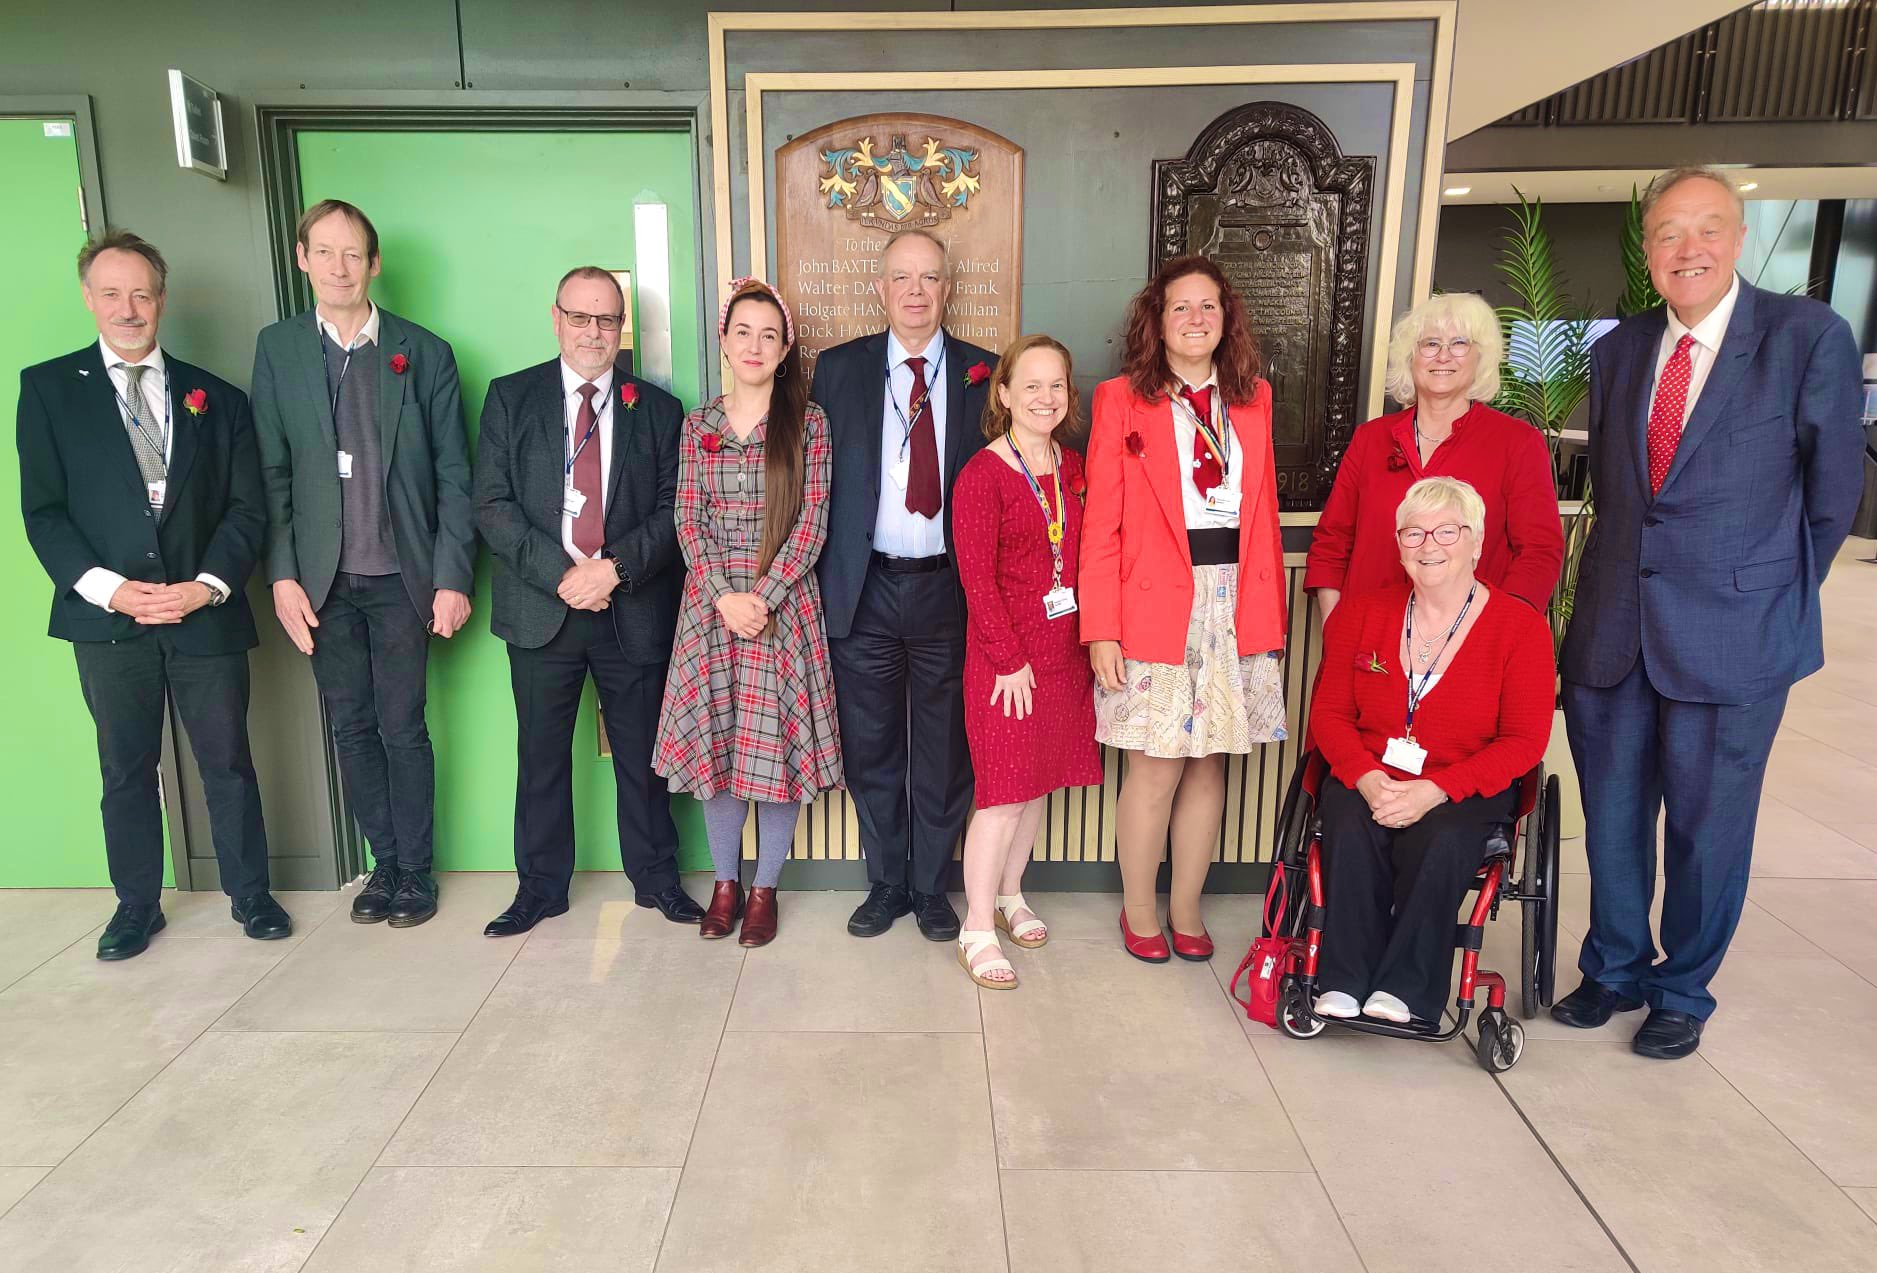 Labour group now 10 on Cambridgeshire County Council with the decision by Cllr Keith Prentice to join them. New line up revealed today. PHOTO: Cambridgeshire Labour Party